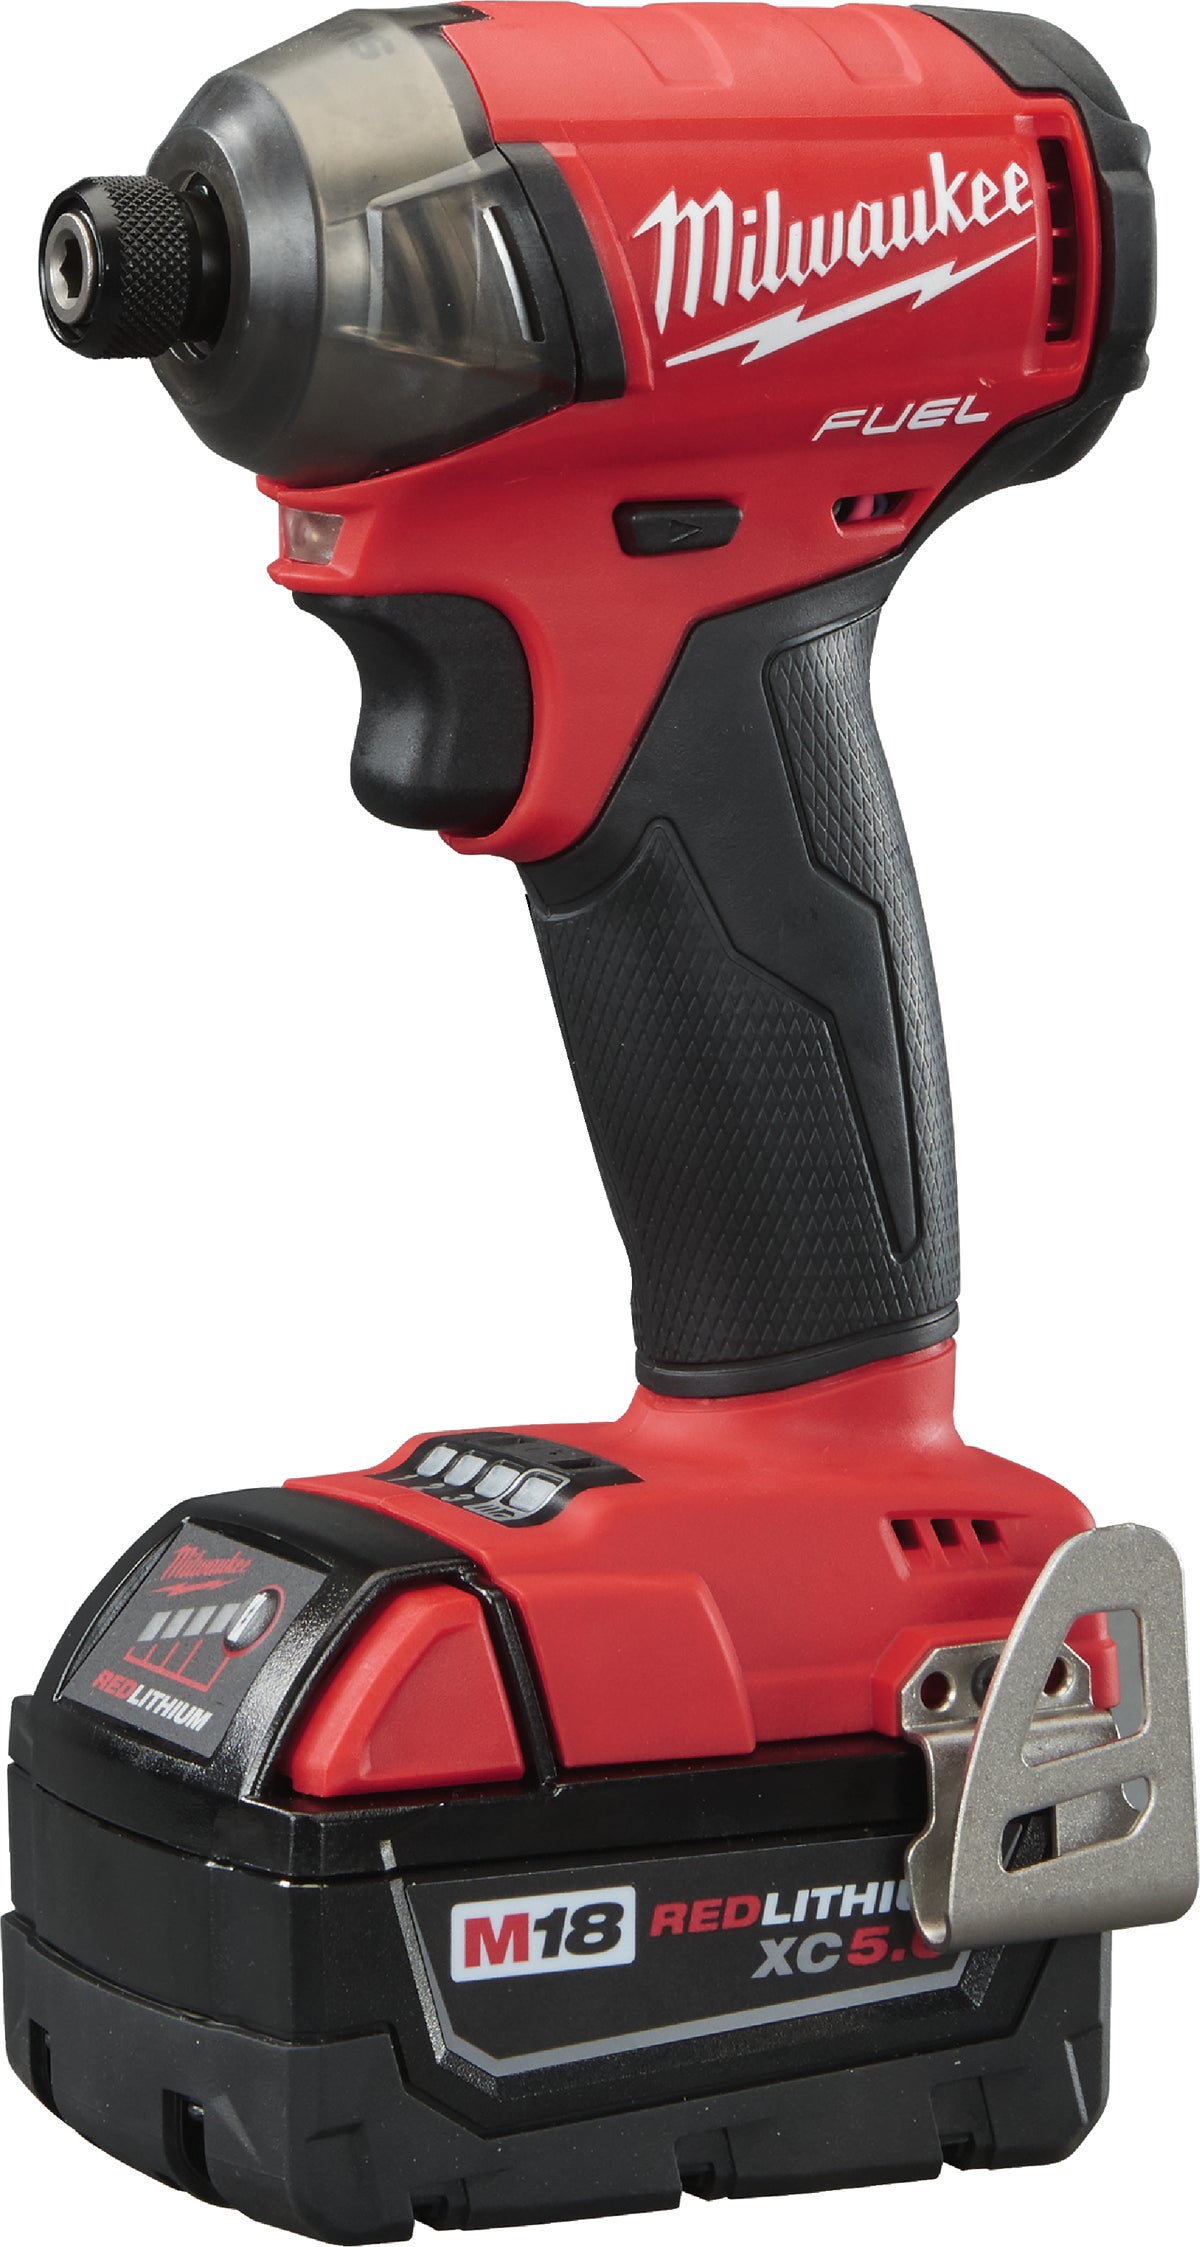 MW M18 FUEL SURGE Lithium-Ion Brushless Cordless Impact Driver Kit 1 4 In. Hex